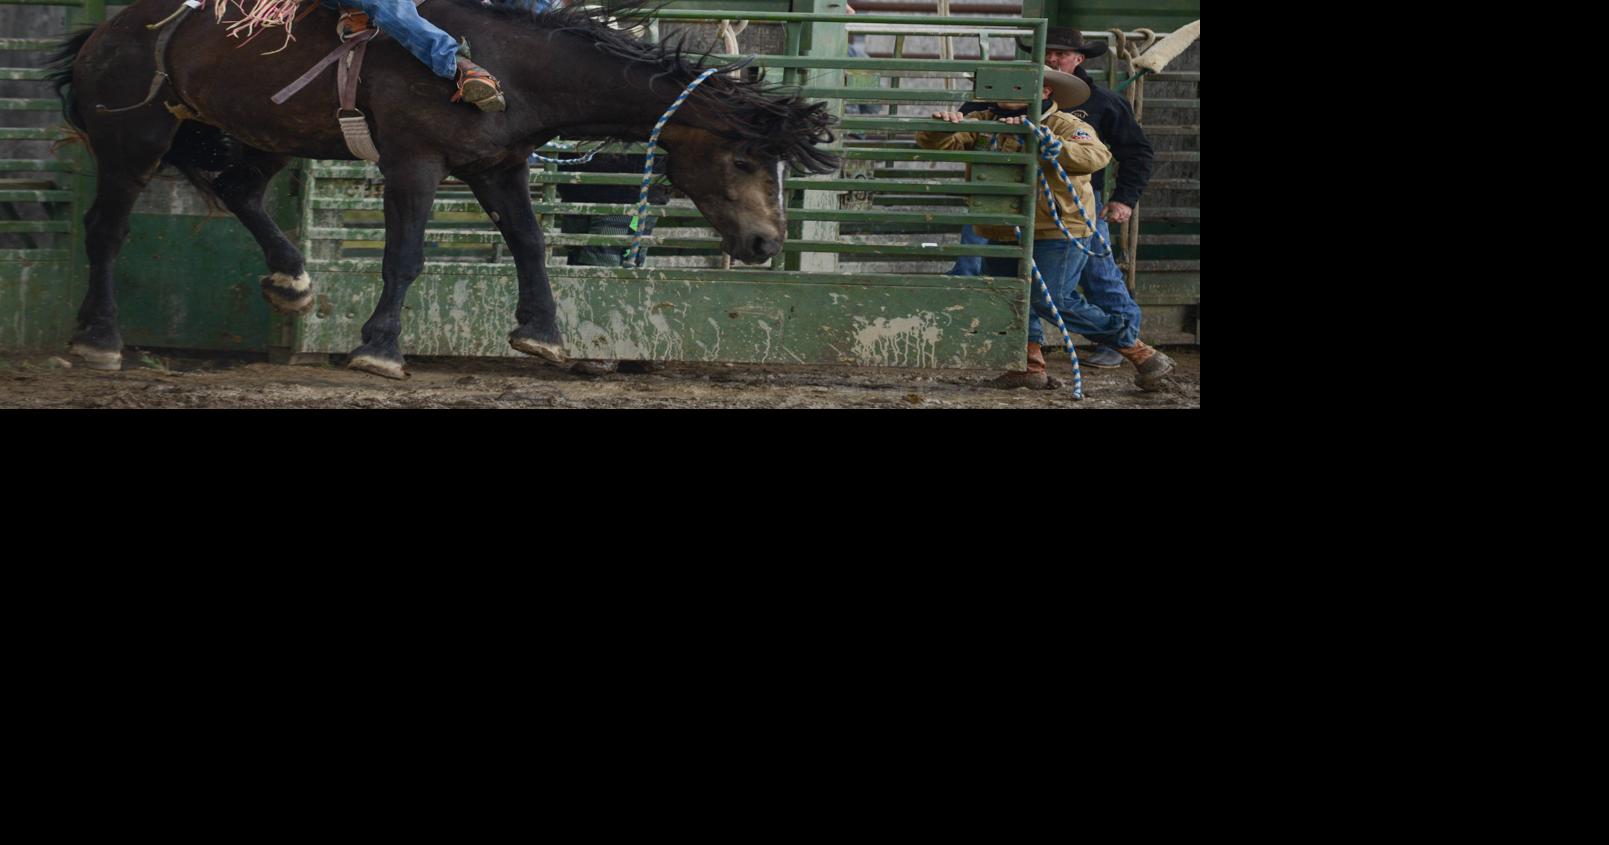 Photo gallery Ennis 4th of July Rodeo Local Sports